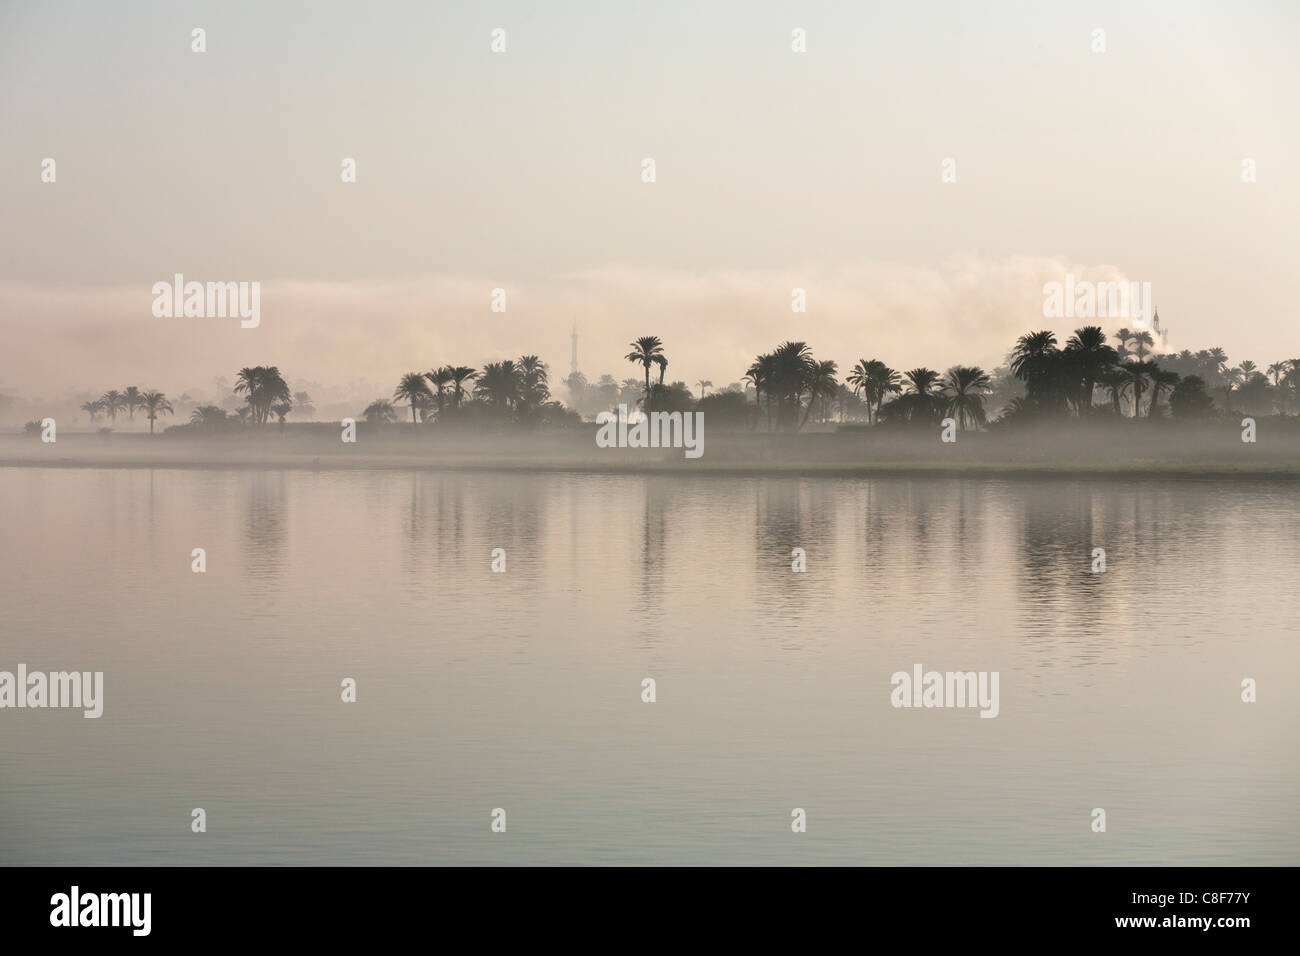 A section of Nile river bank with heavy mist creating muted colour layers, water trees, palms, mosque minaret, and  smoke, Egypt Stock Photo